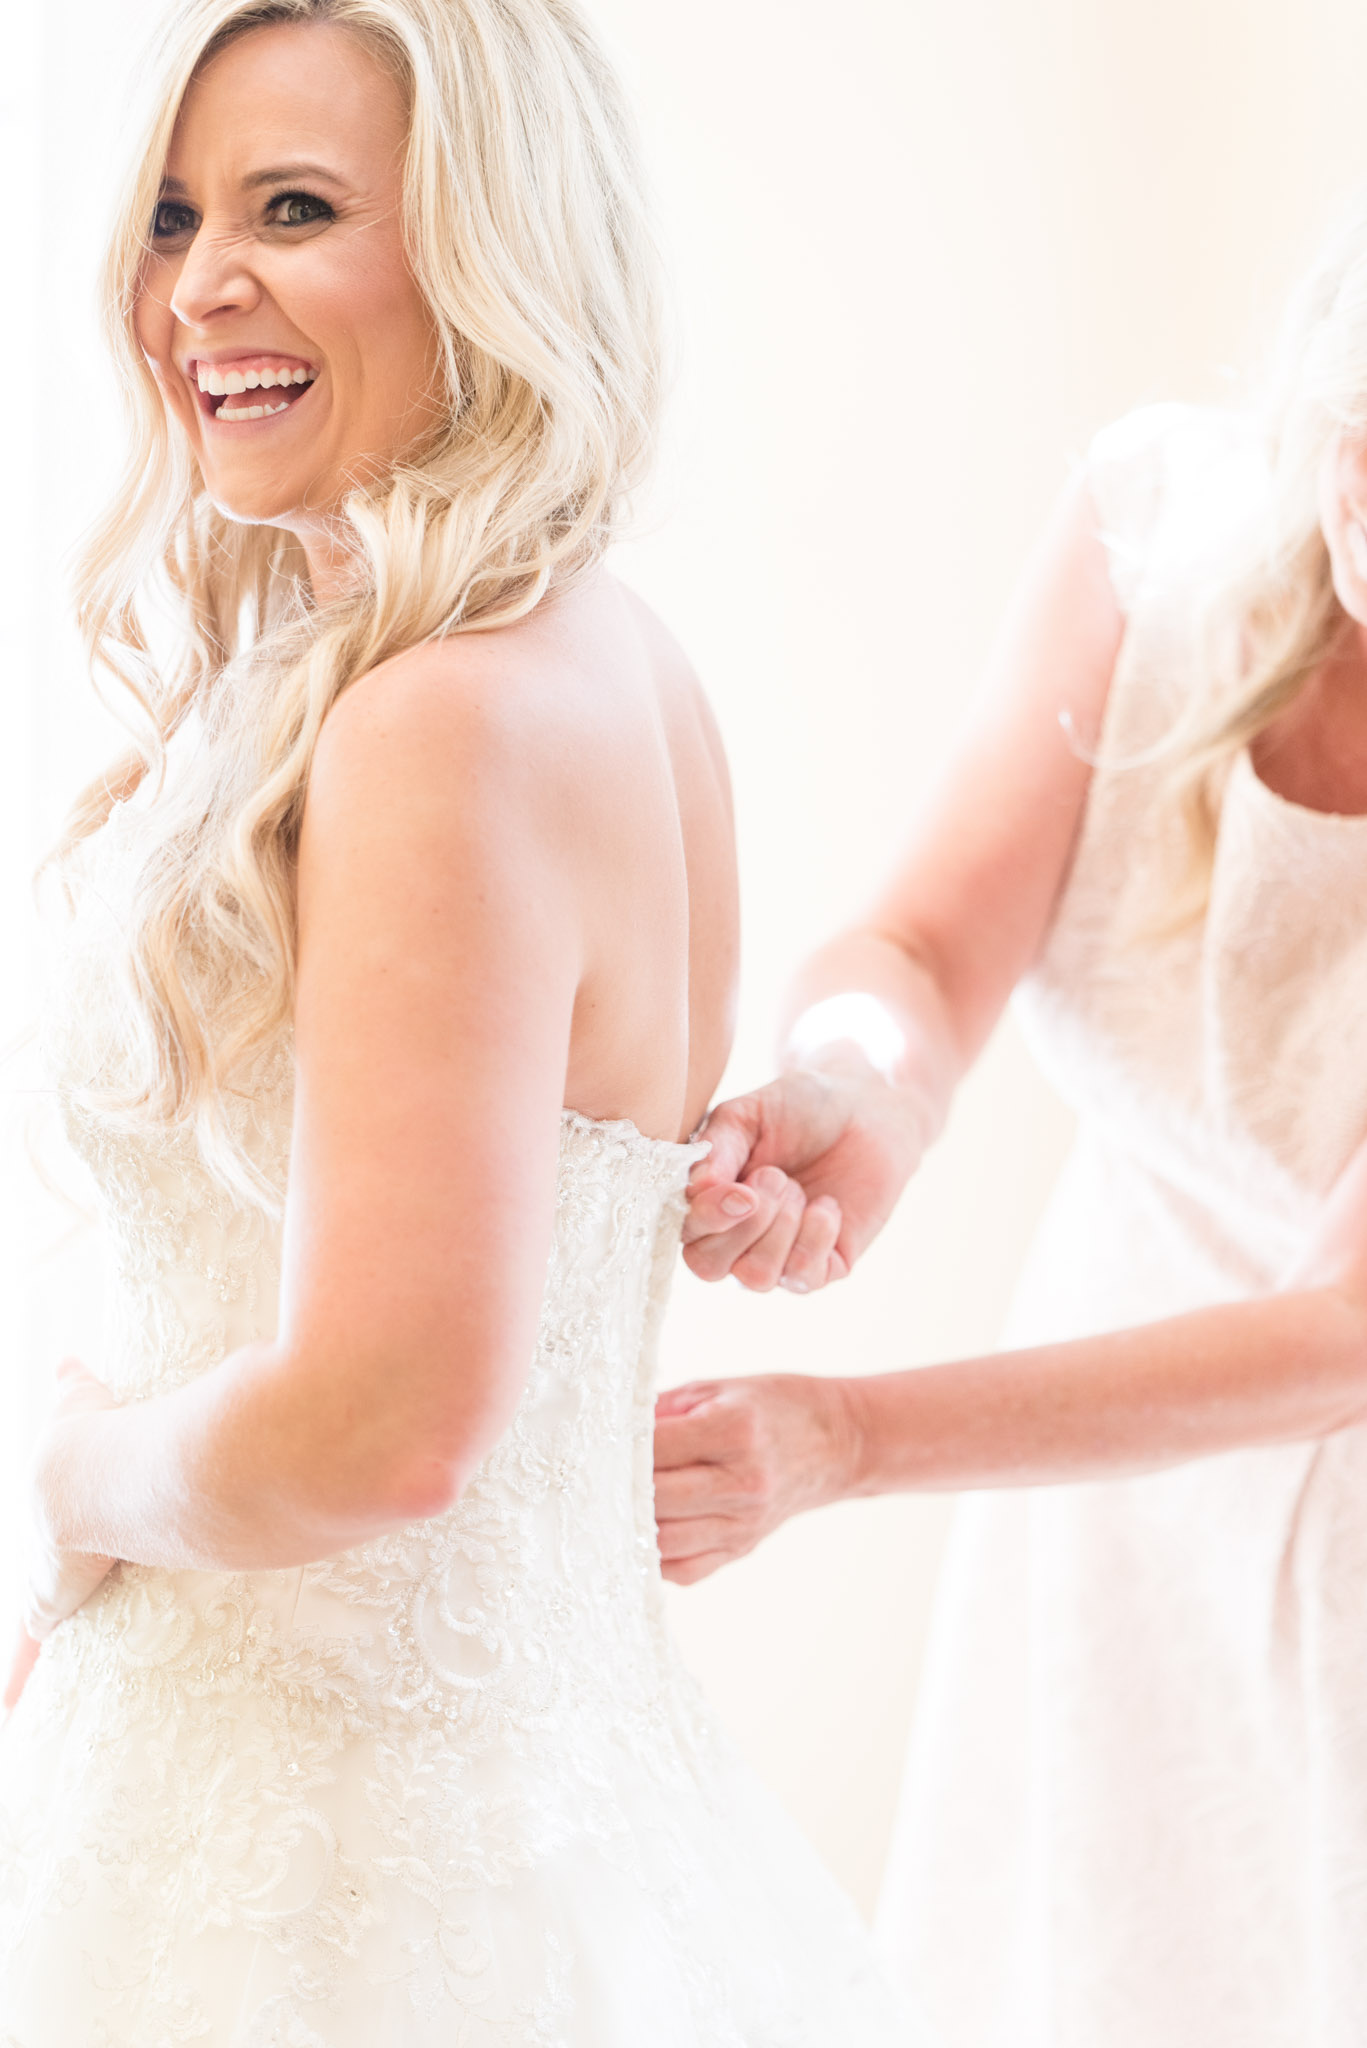 Bride laughs as mother zips dress.